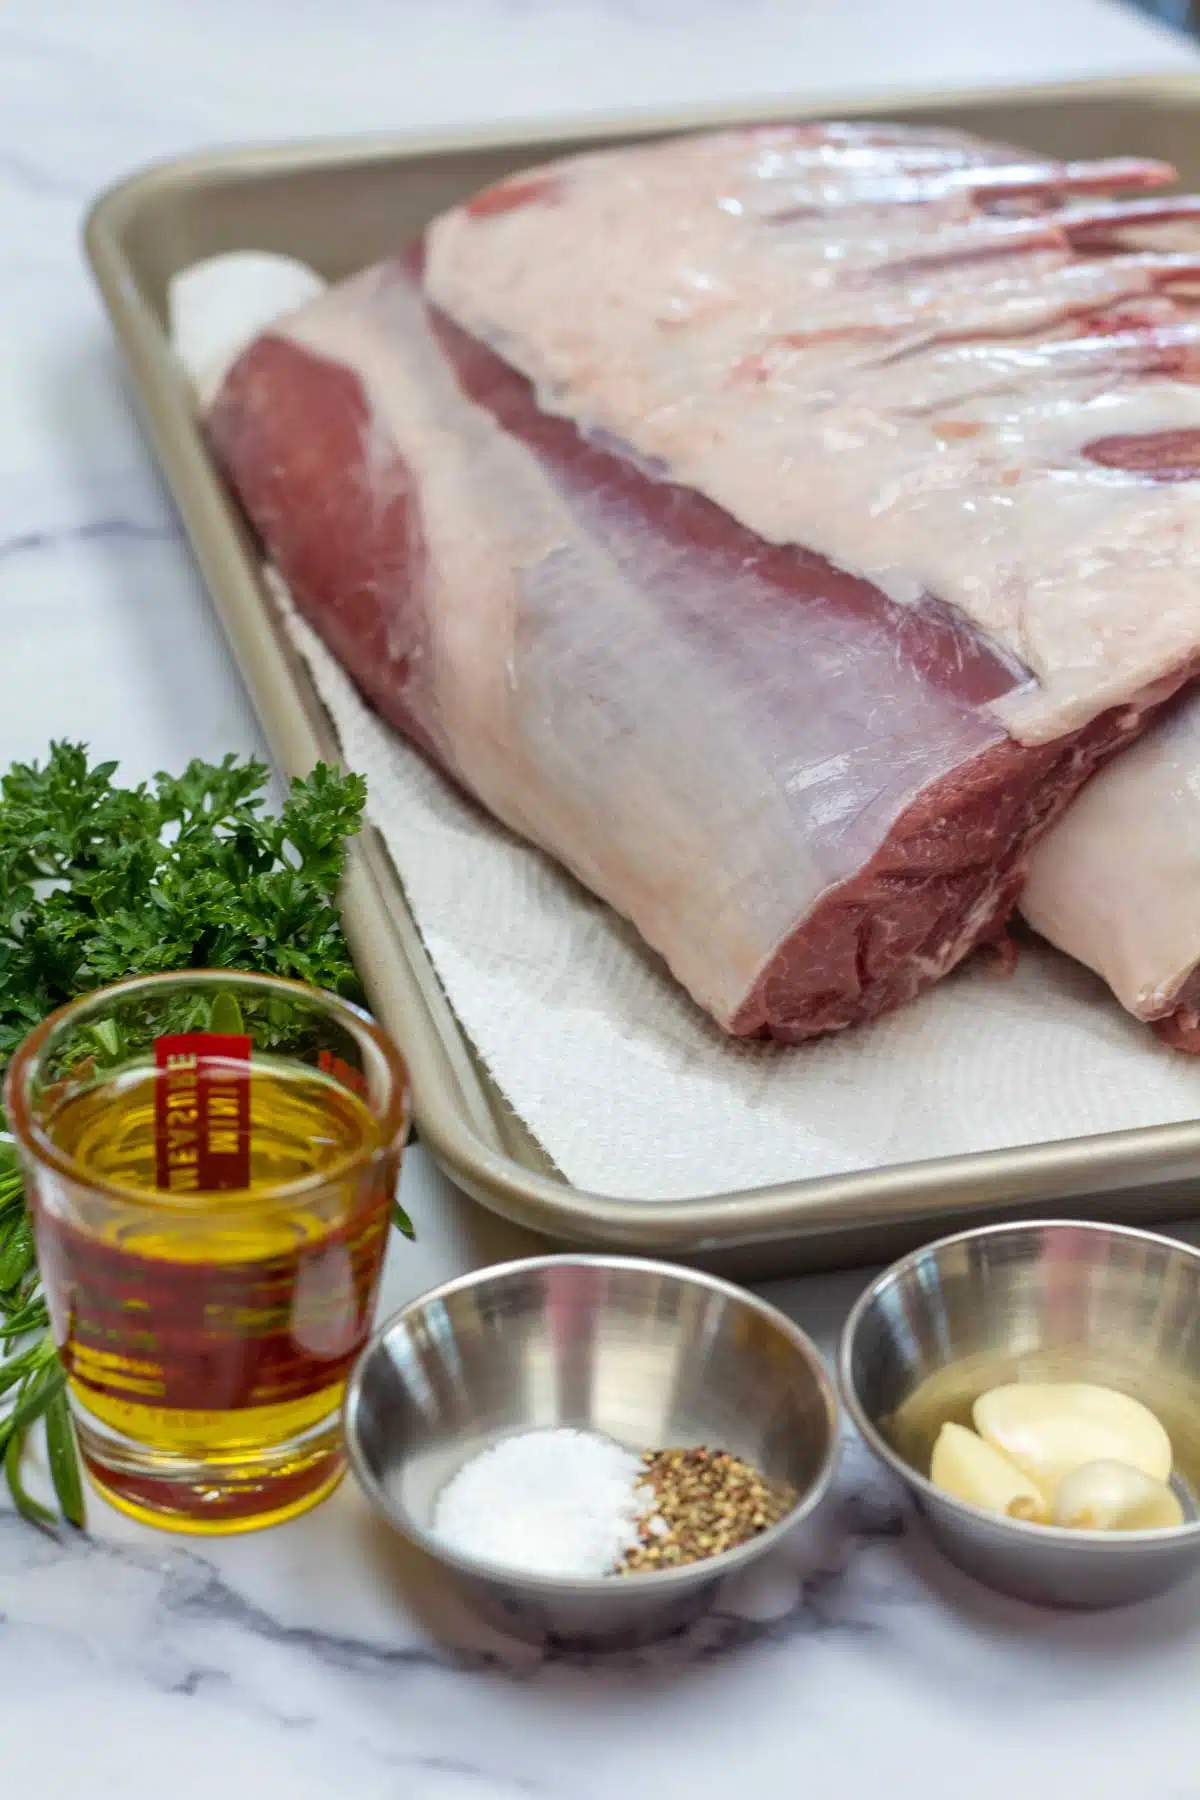 Tall image showing ingredients for rack of lamb.